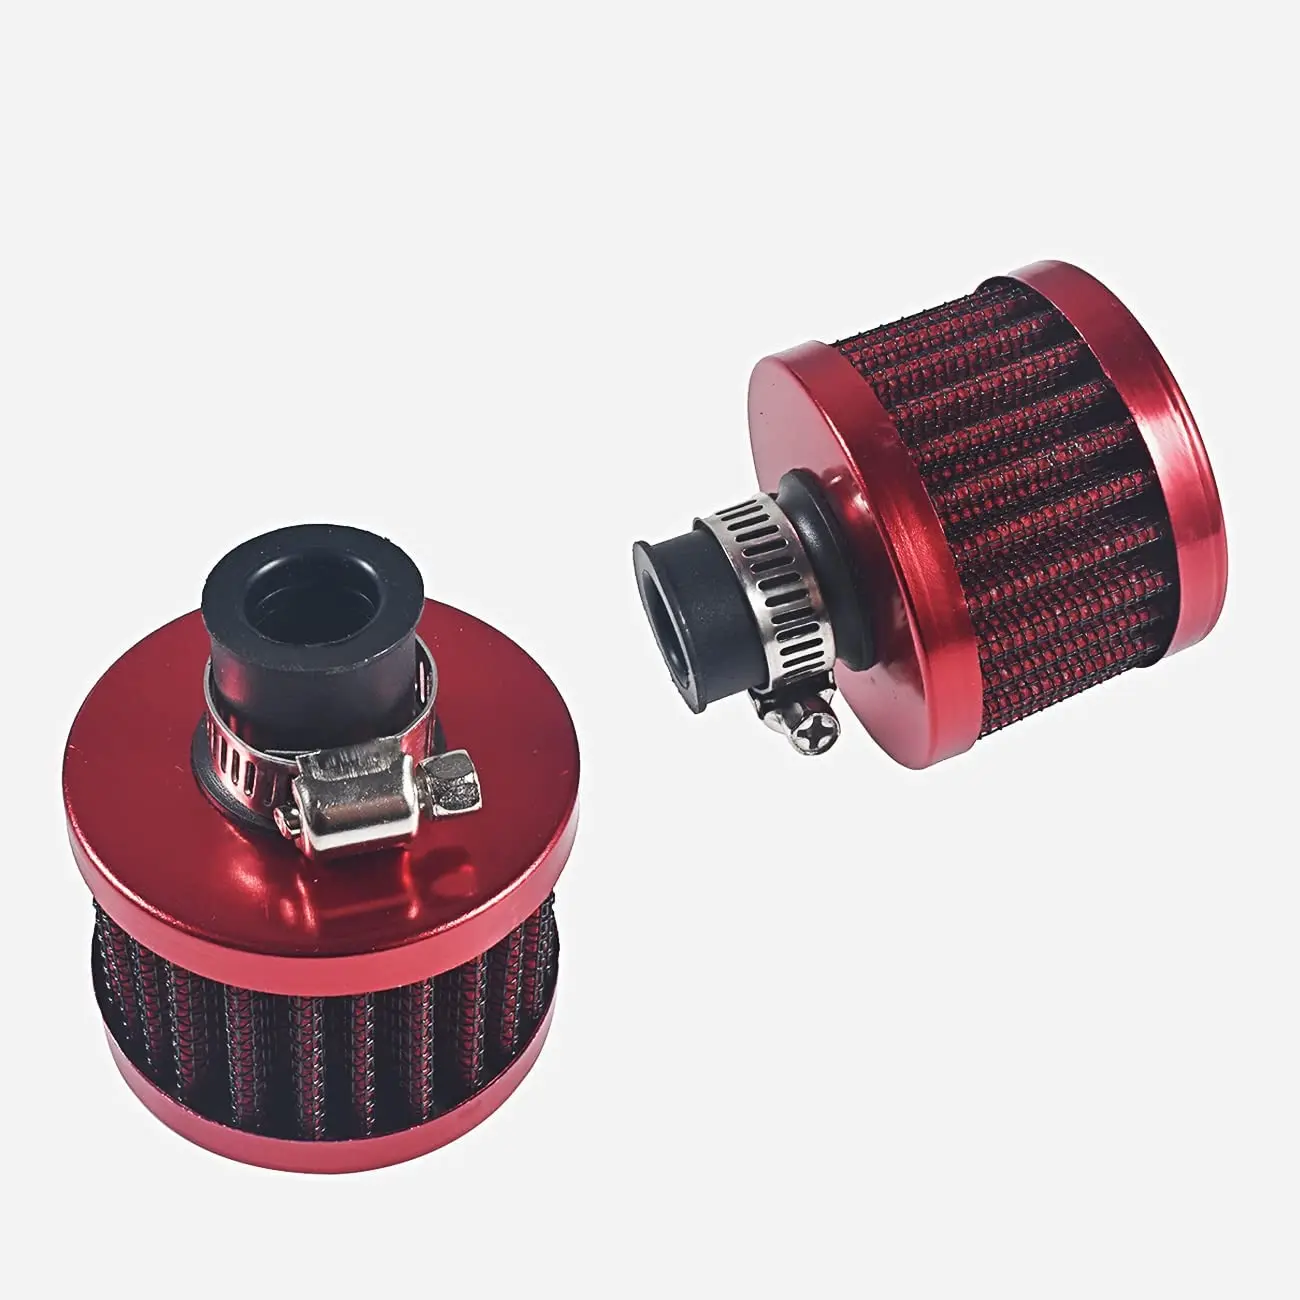 2pcs 12mm Red Cold Air Intake Filter Turbo Vent Crankcase Car Breather Valve Cover